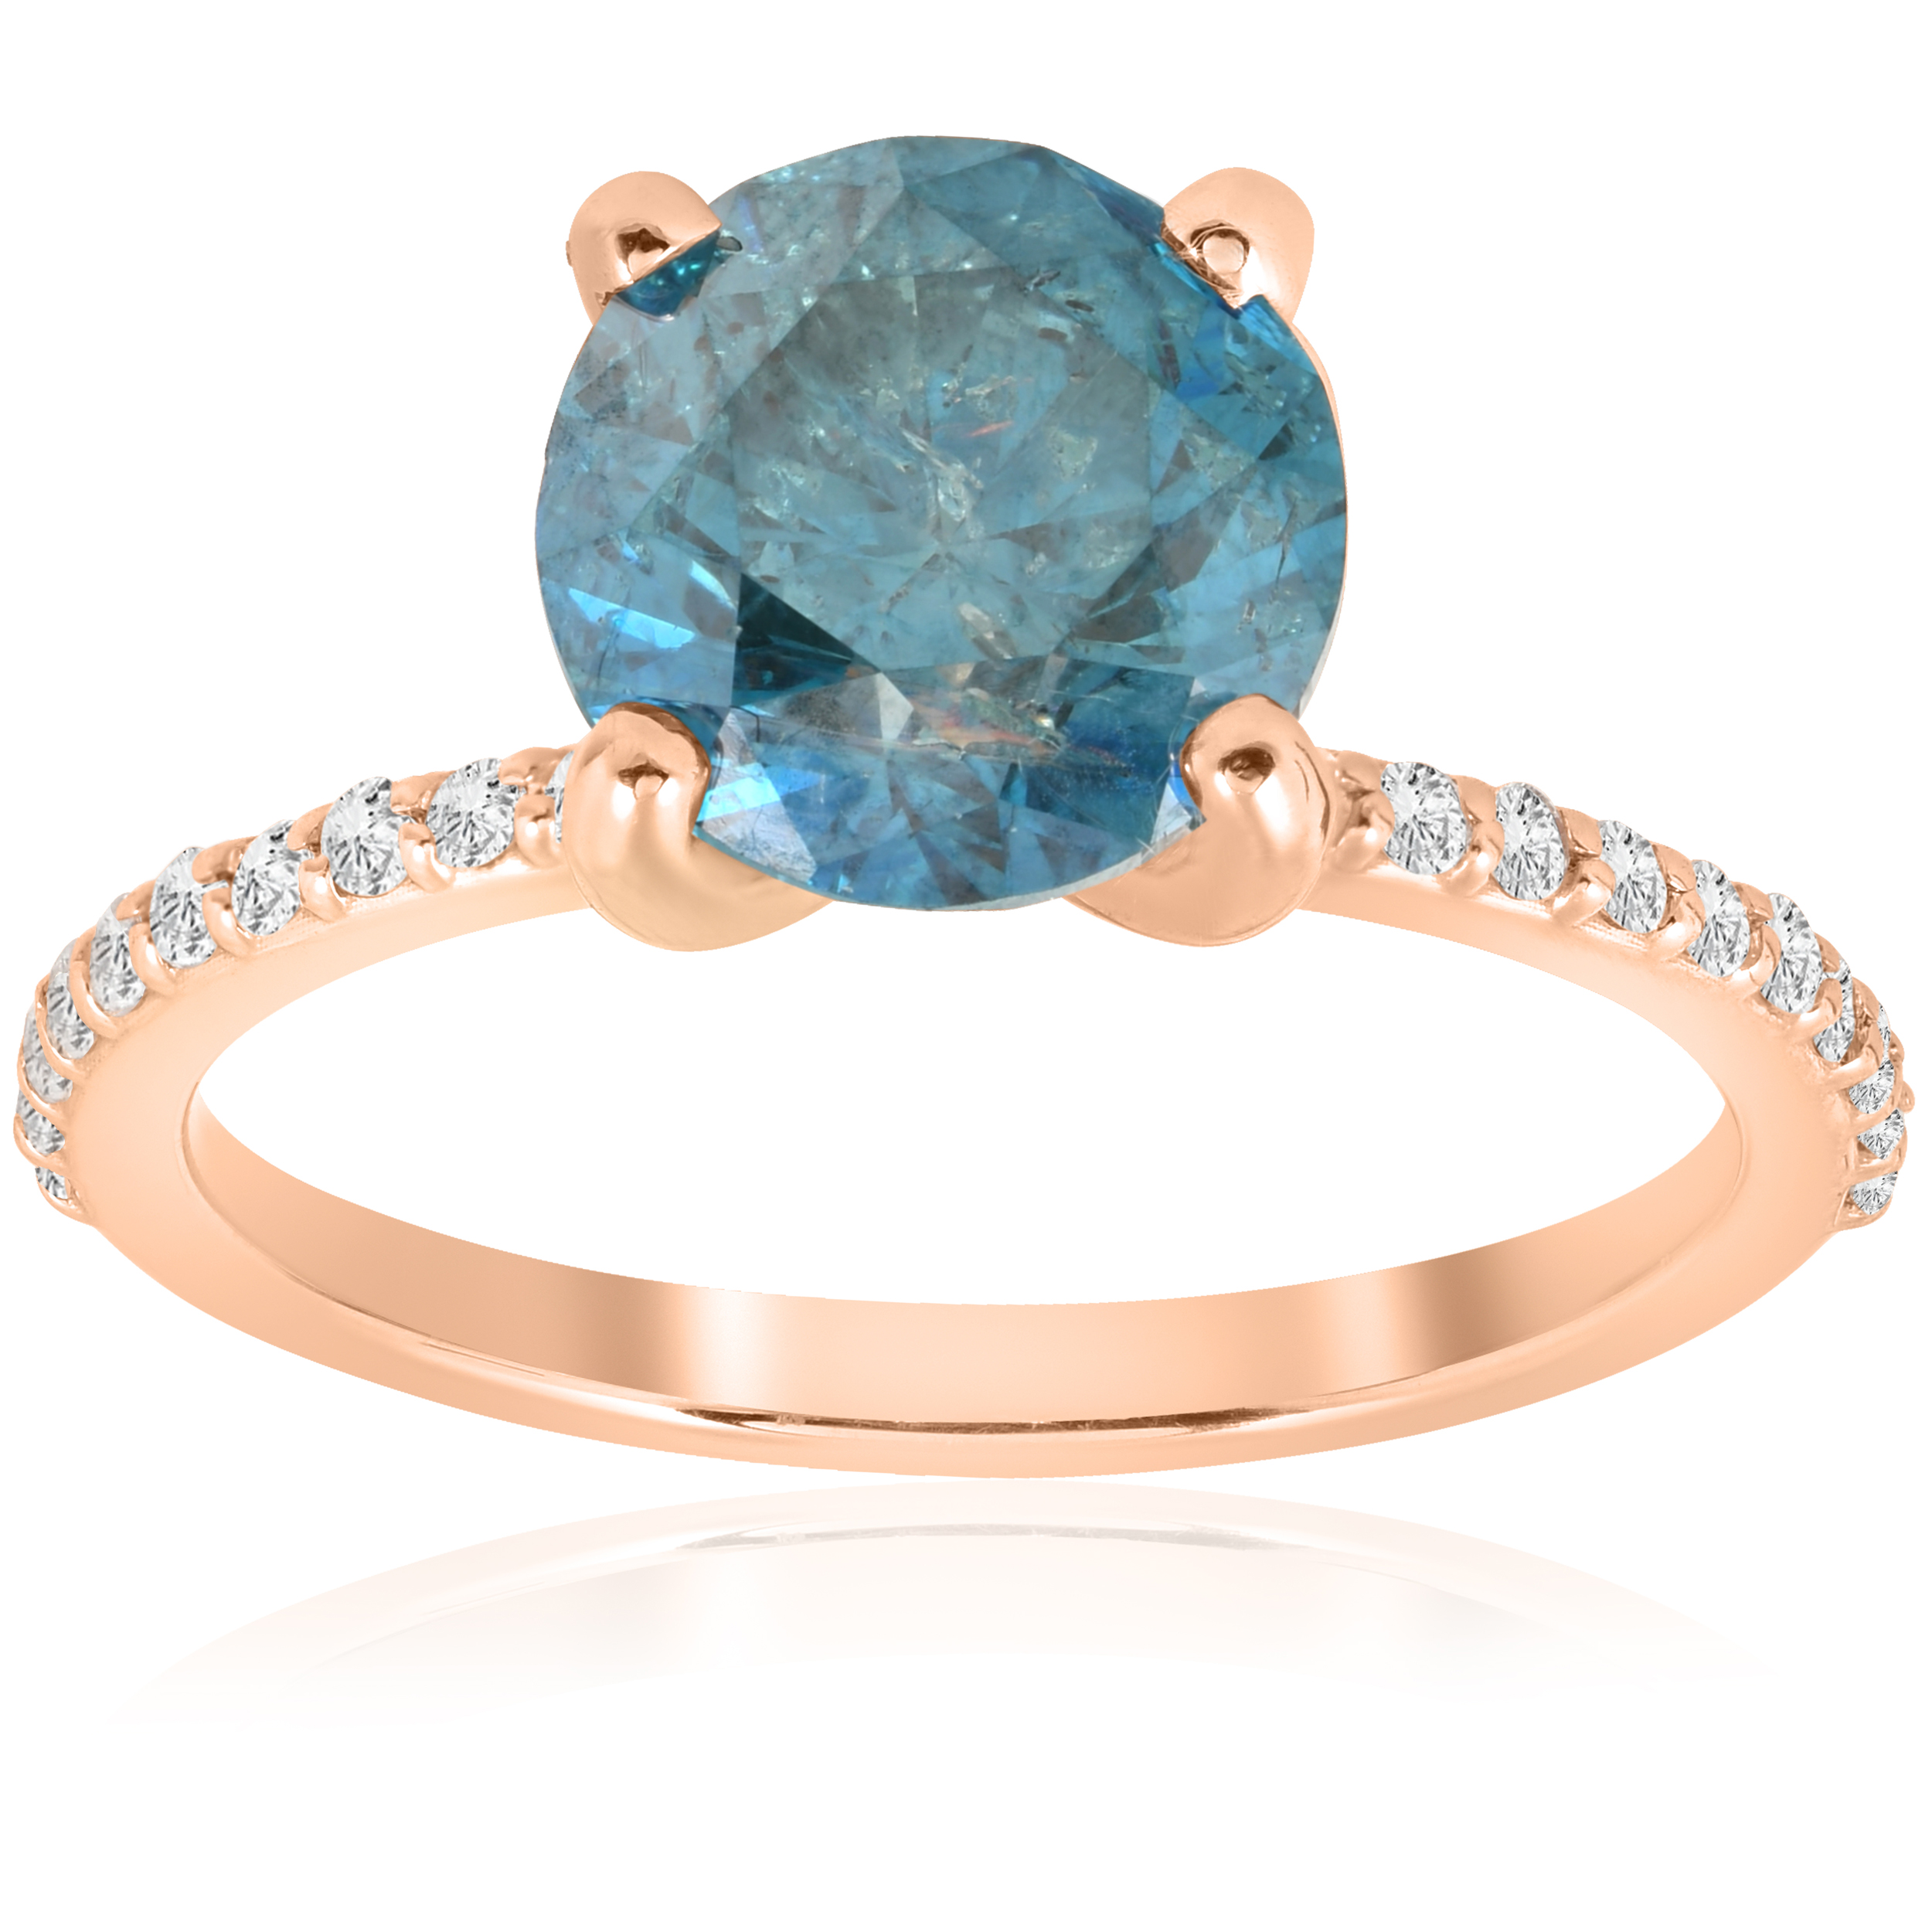 Huge 3 1/5ct Blue Diamond Engagement Ring 14k Rose Gold Solitaire With ...